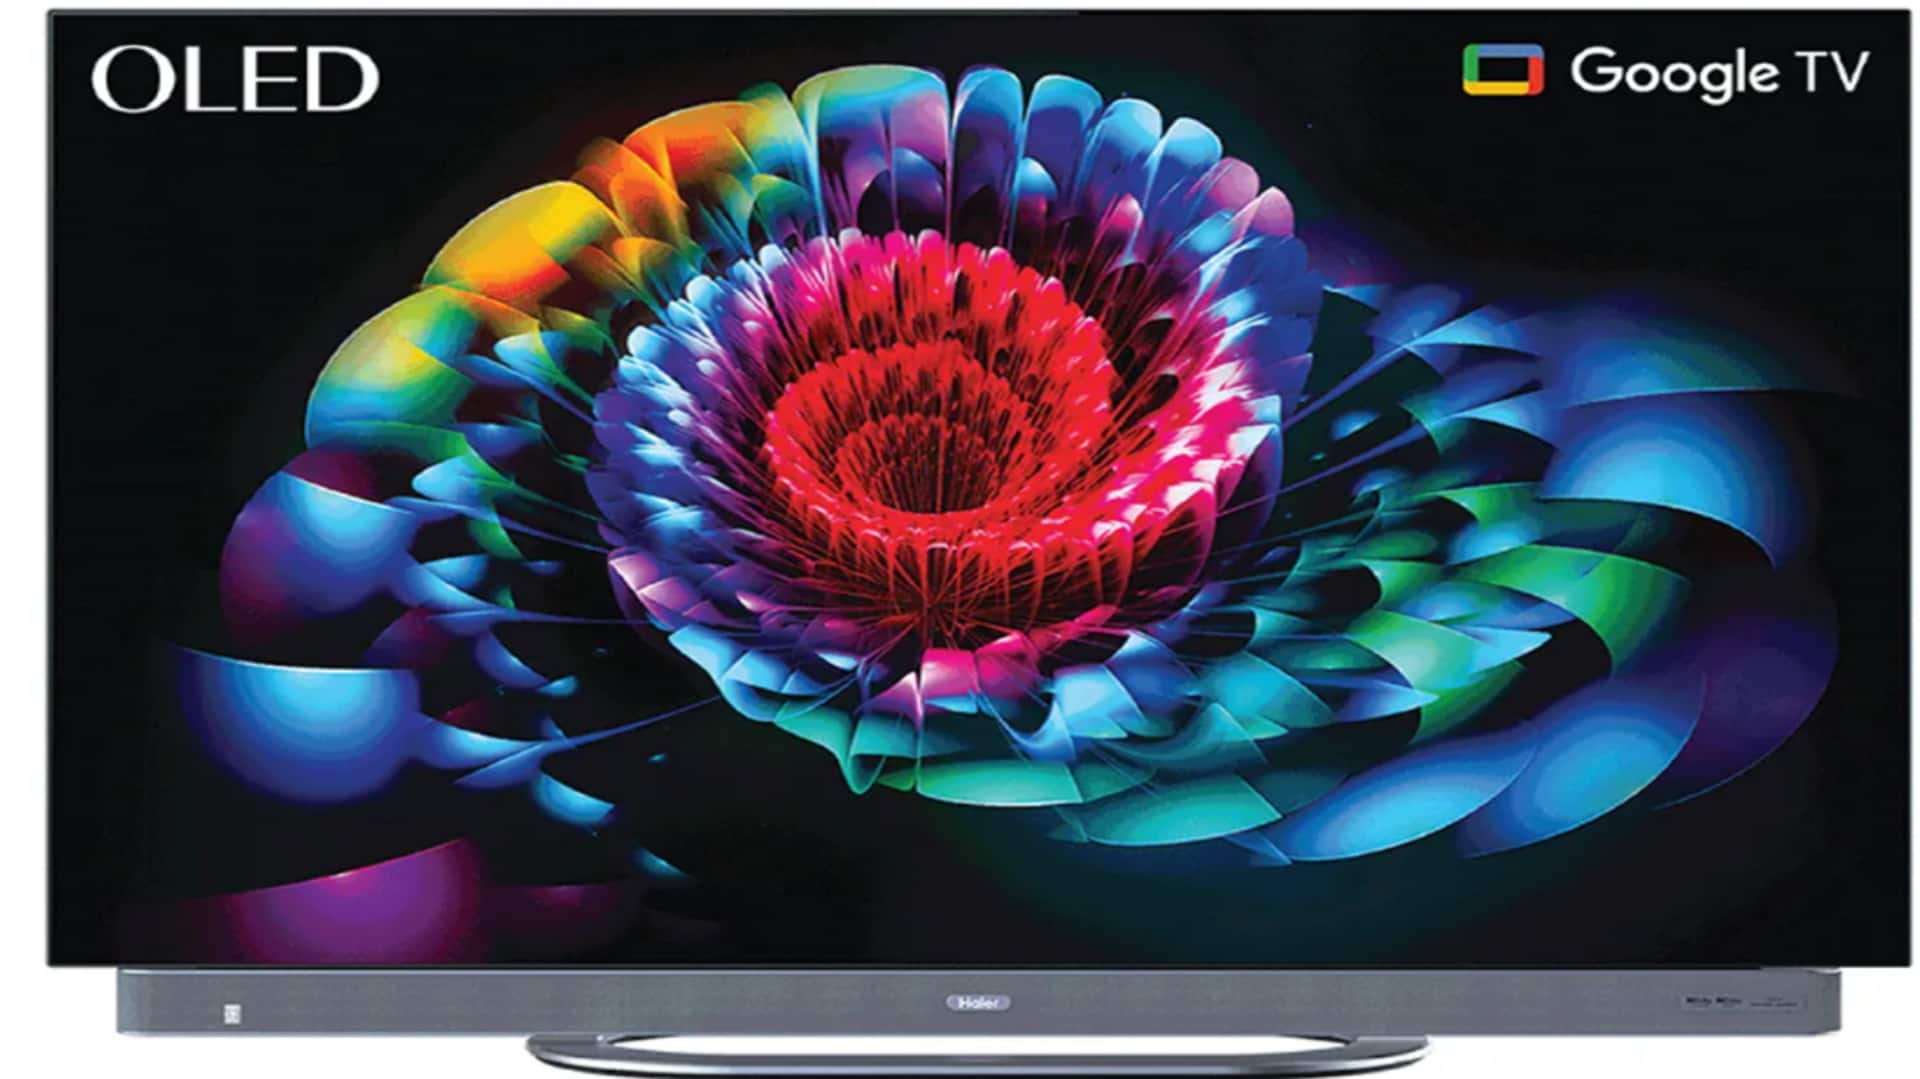 Haier launches 4K OLED TVs starting at Rs. 1.59 lakh